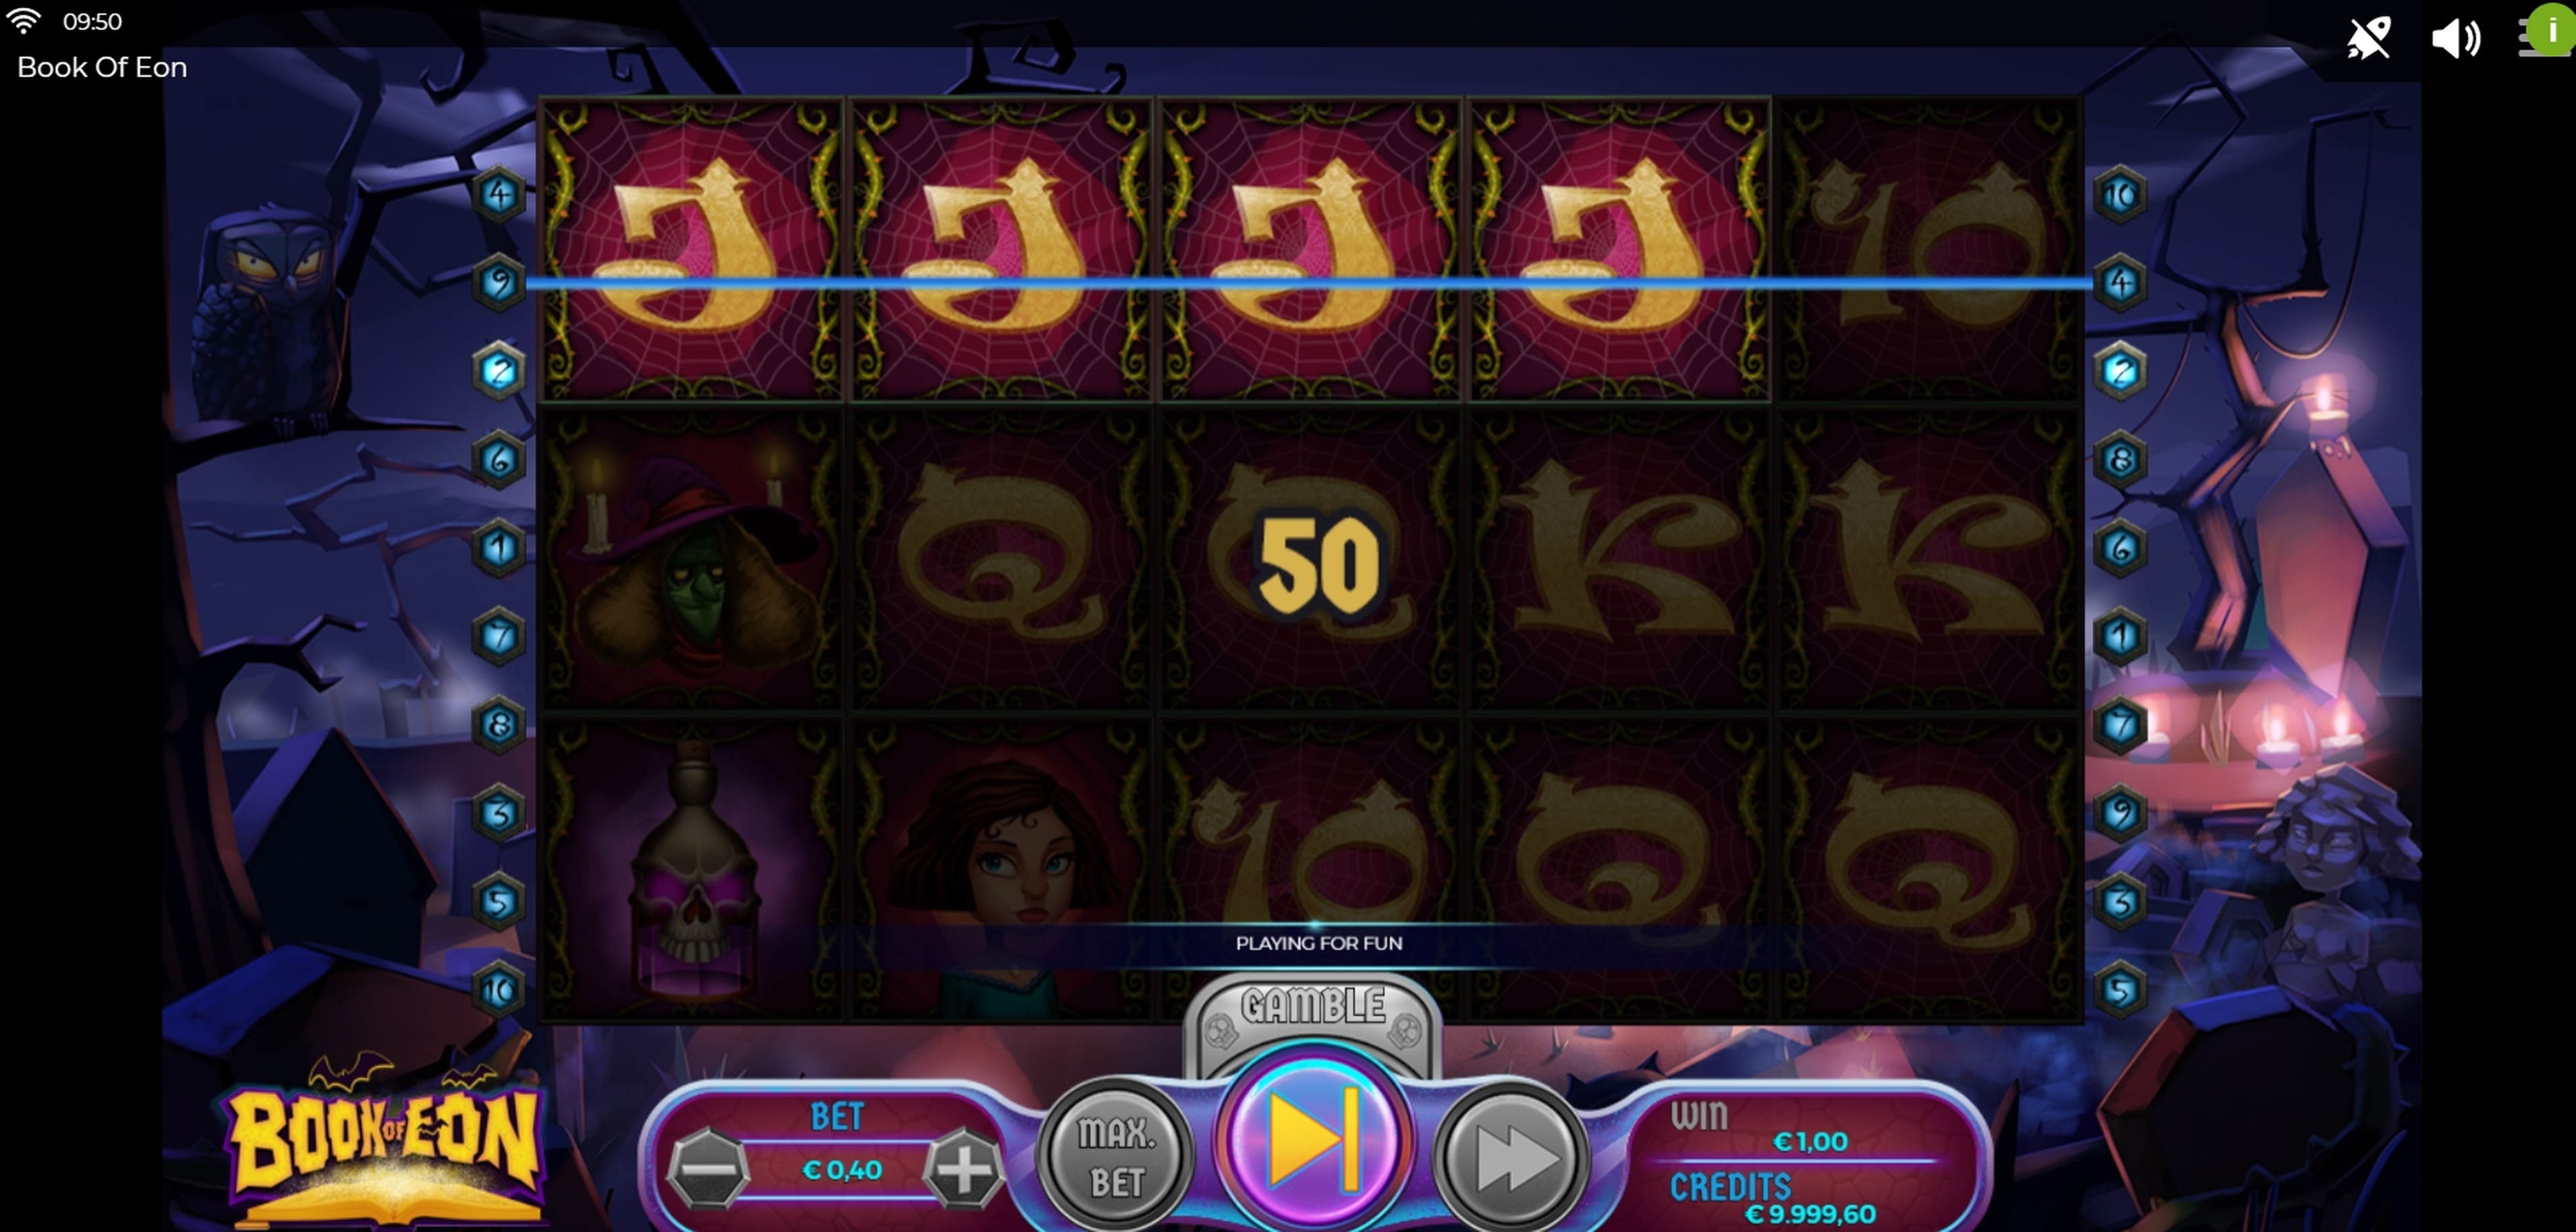 Win Money in Book of Eon Free Slot Game by Spinmatic